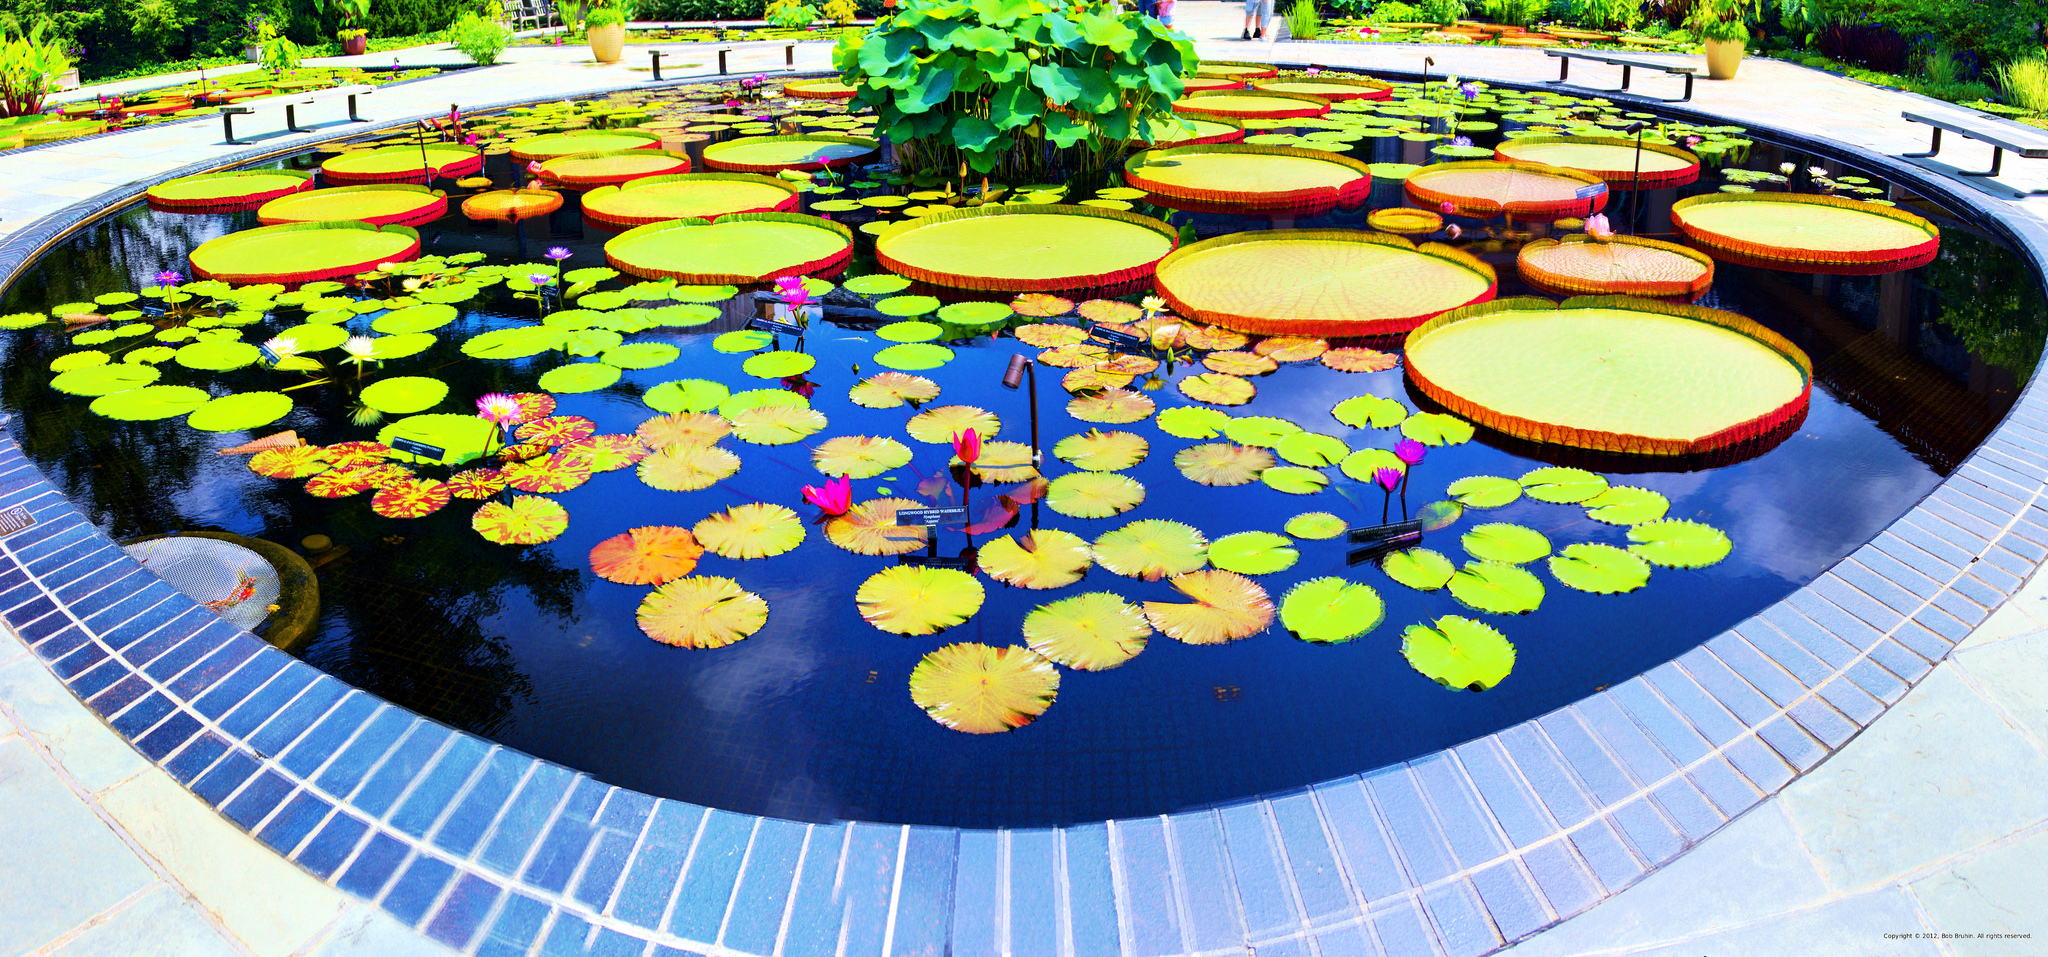 Lily Pond at Longwood Gardens, Photo by Bob Bruhin